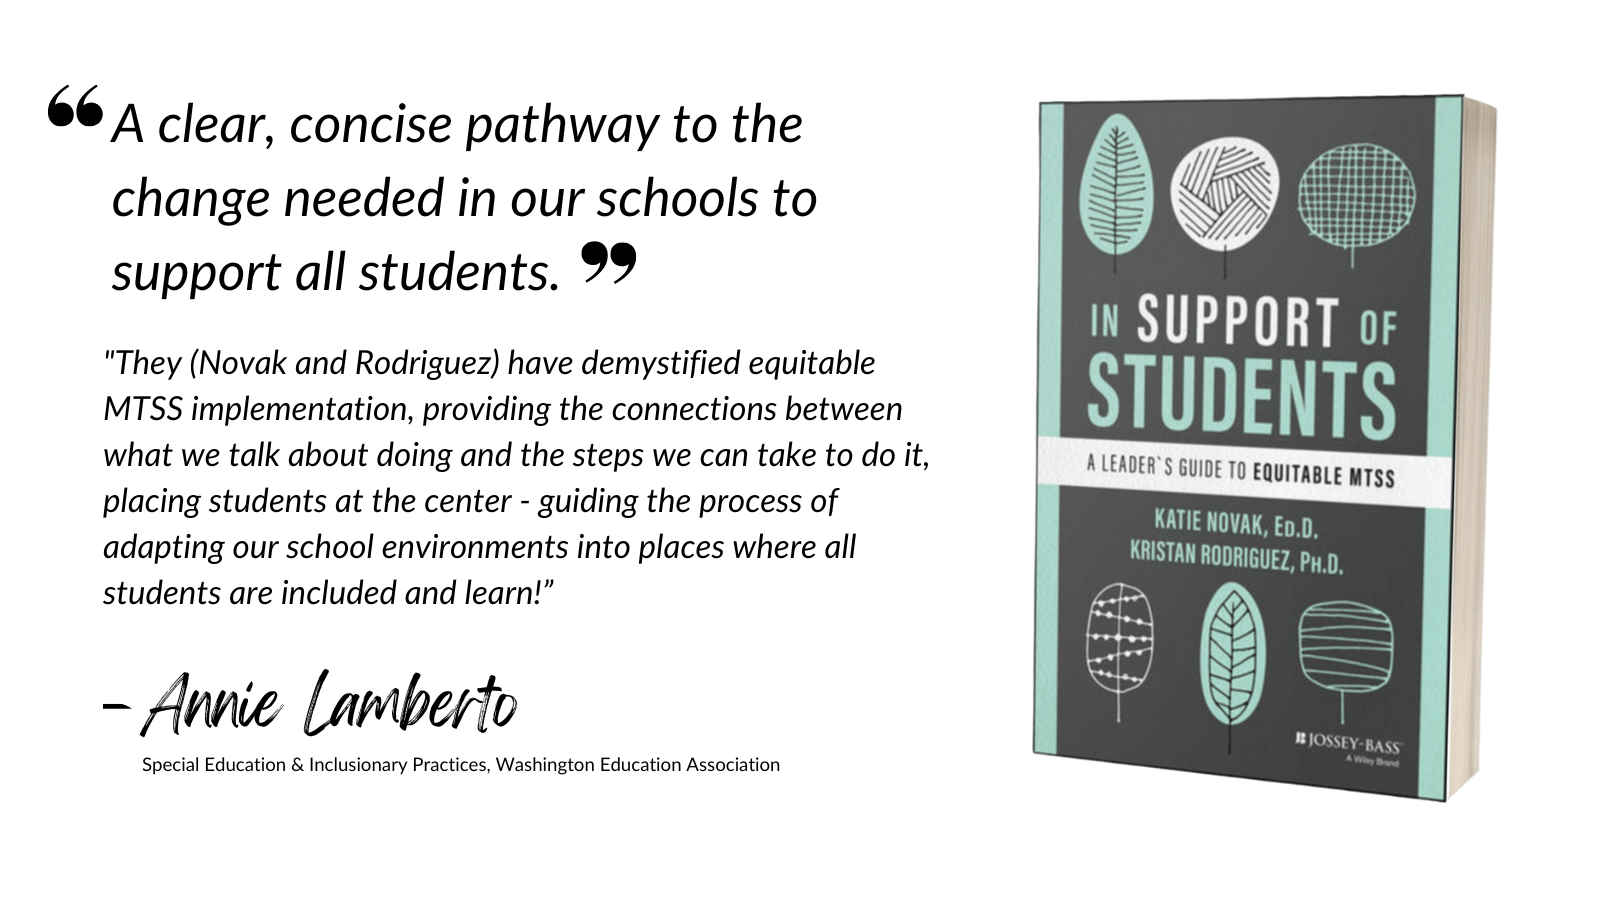 A clear, concise pathway to the change needed in our schools to support all students.